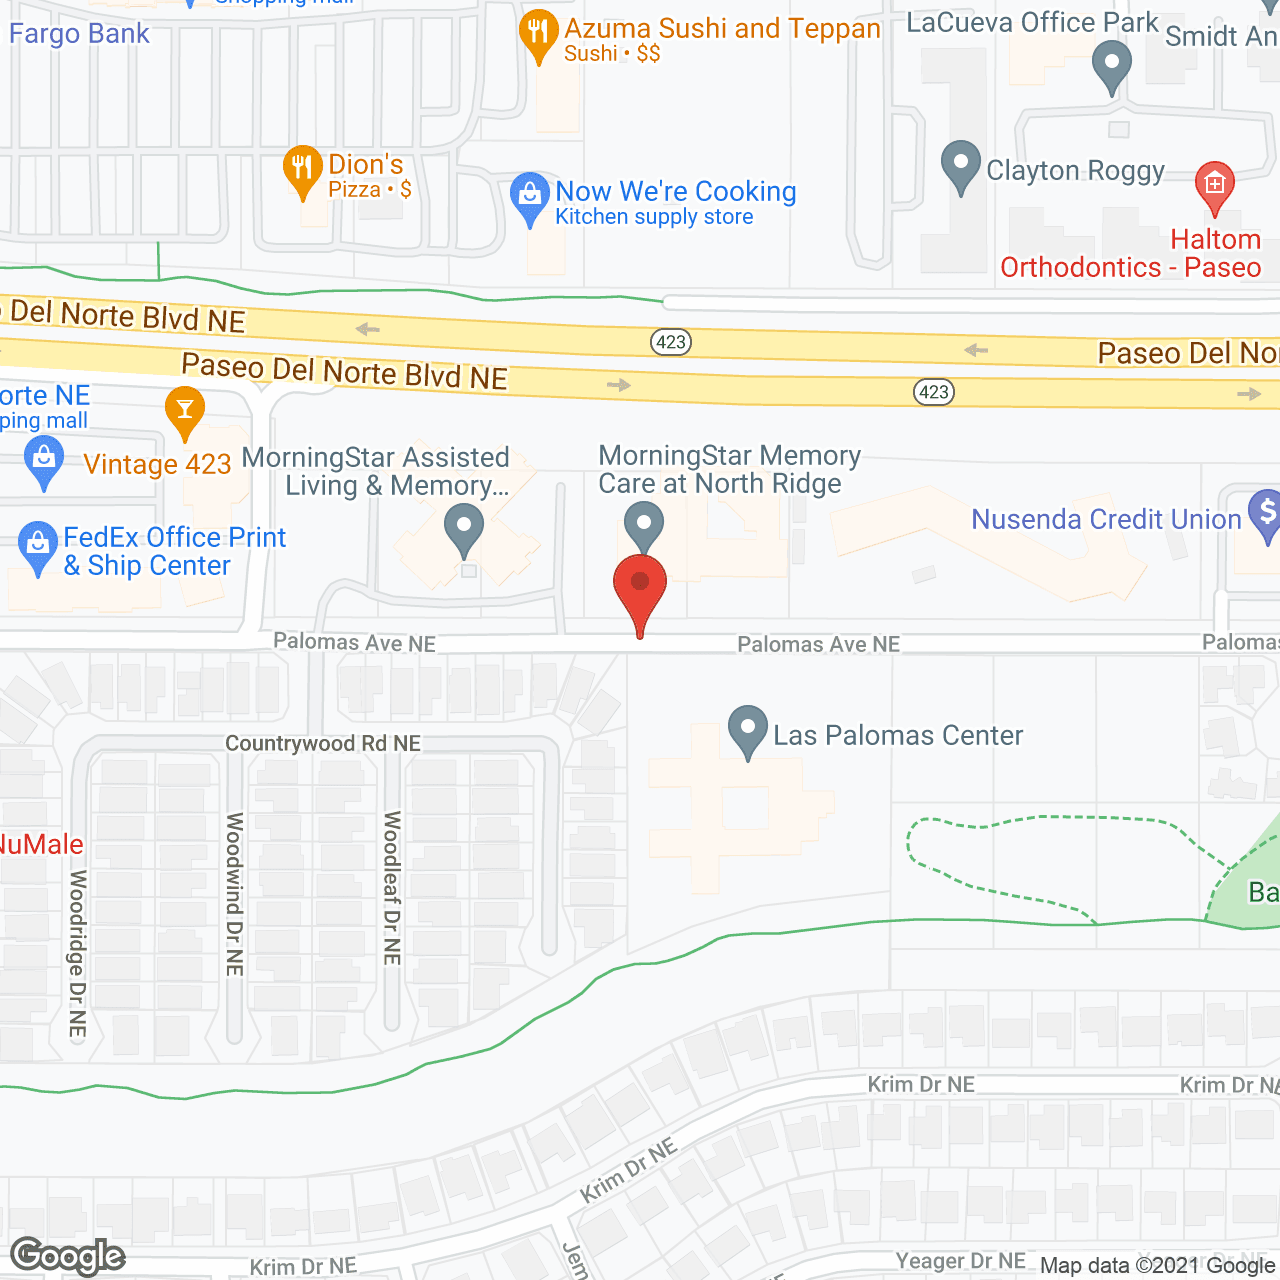 MorningStar Assisted Living & Memory Care of Albuquerque in google map